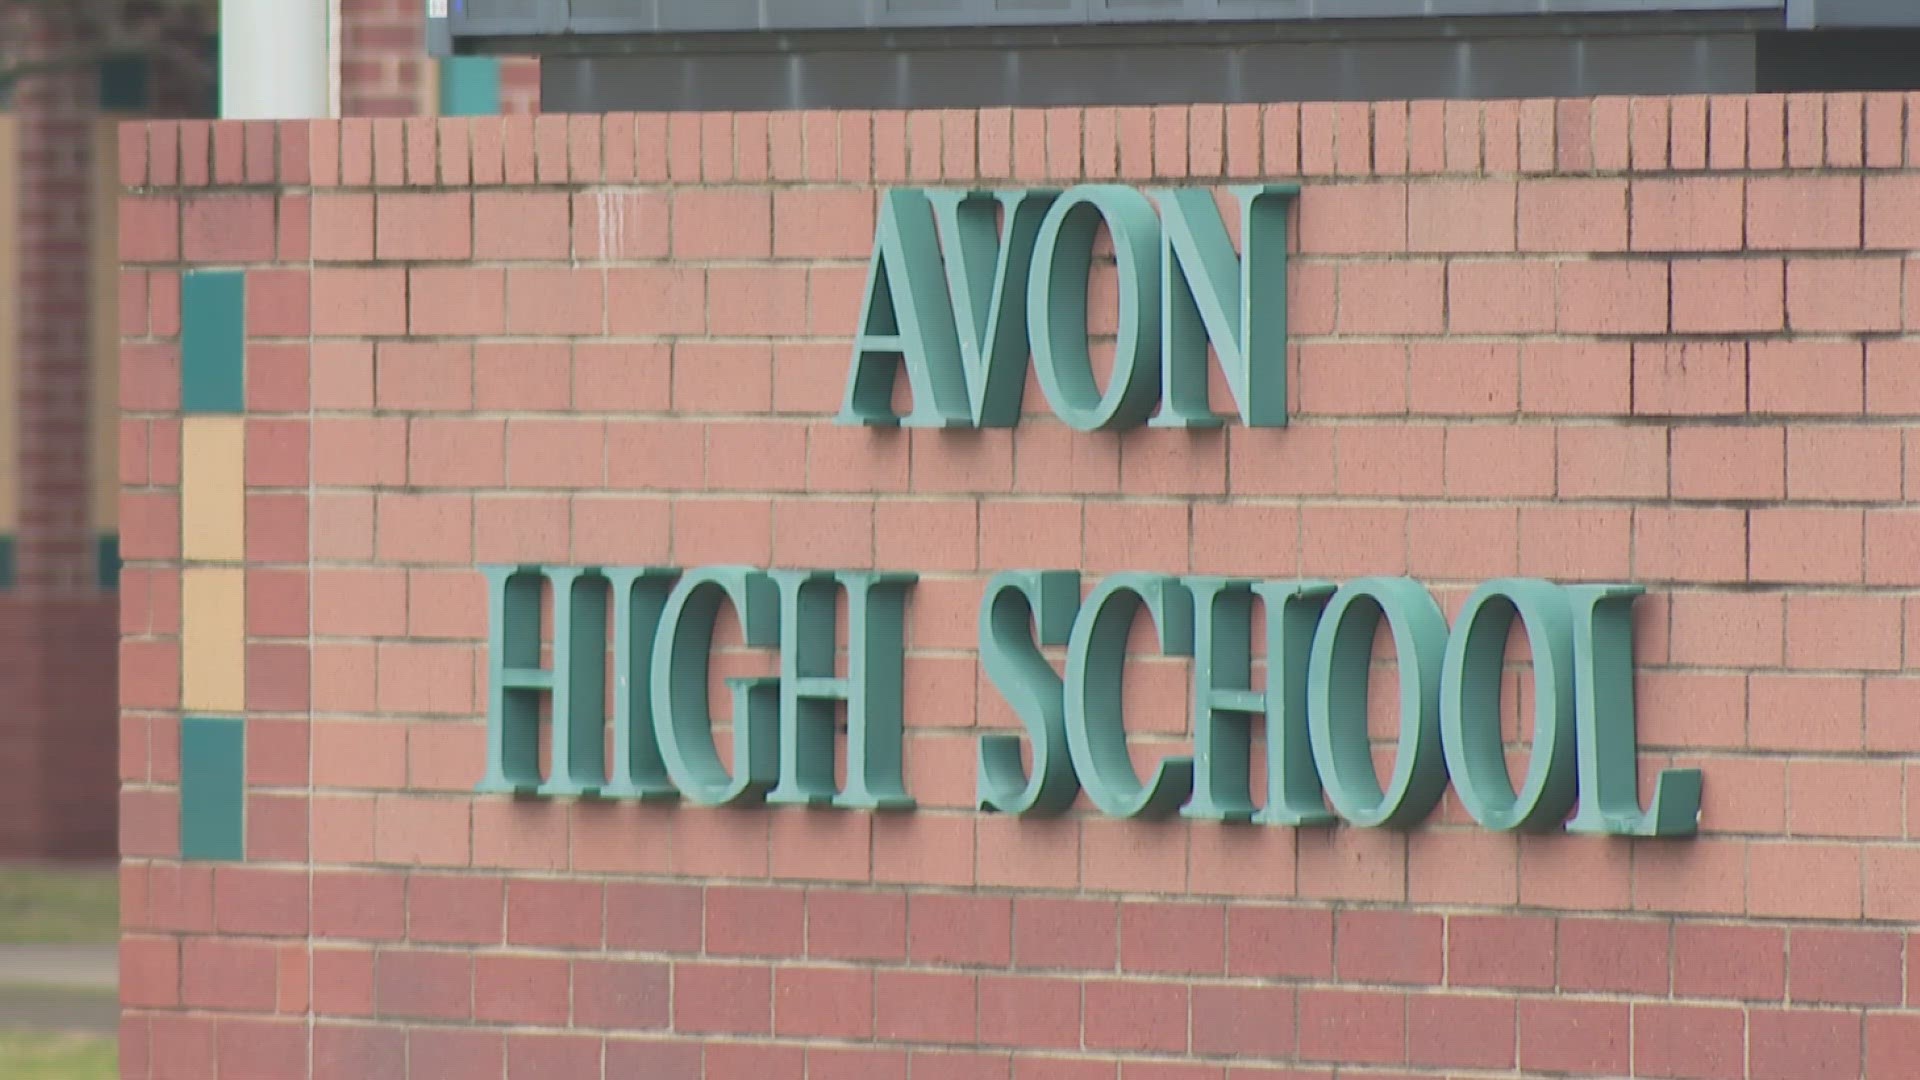 The family of Noah Pillow confirmed the teen died over the weekend, the second Avon student to die from an overdose in recent months.